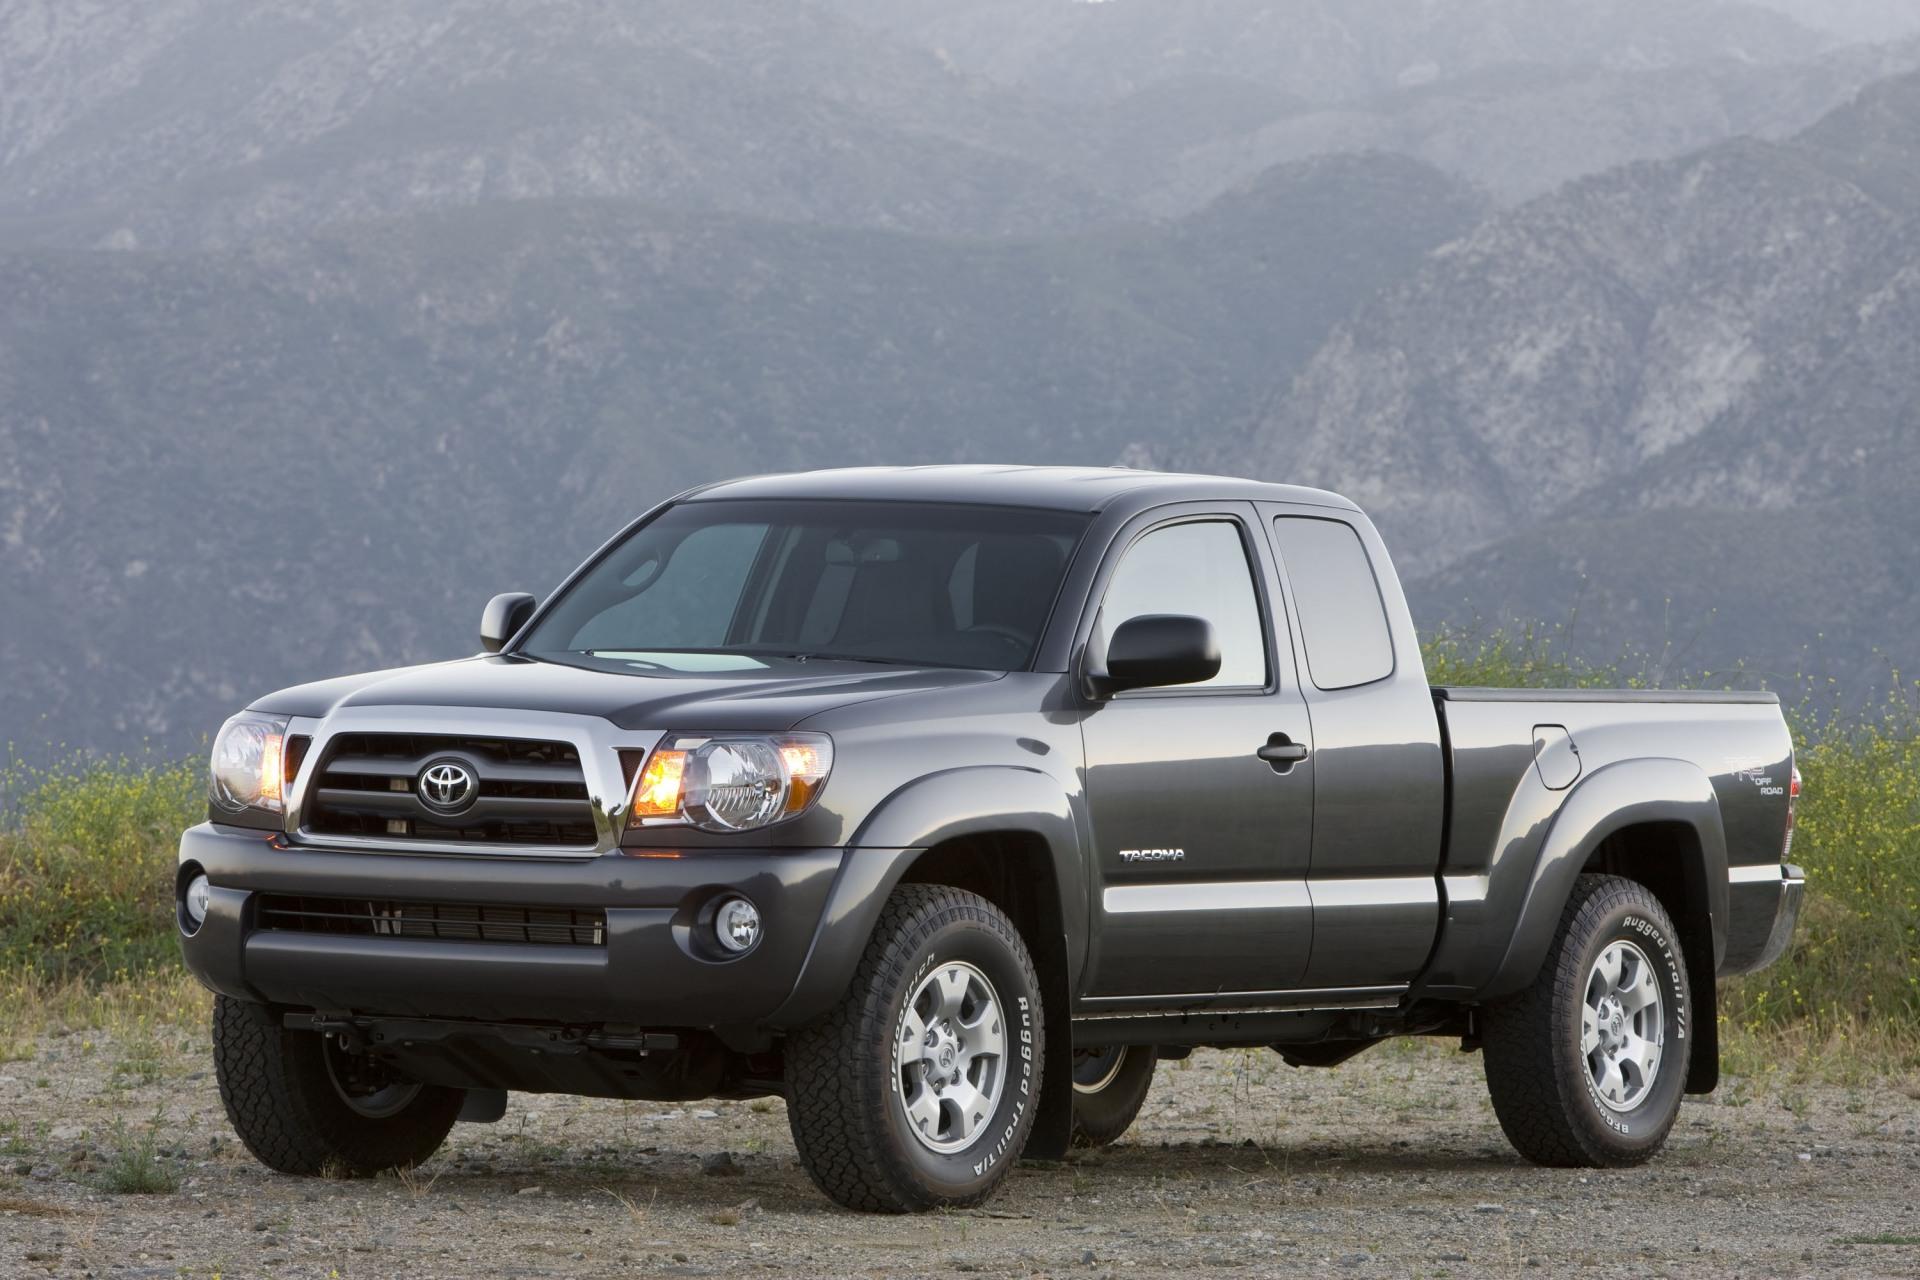 Toyota Tacoma Wallpaper 6696 Hd Wallpapers in Cars   Imagescicom